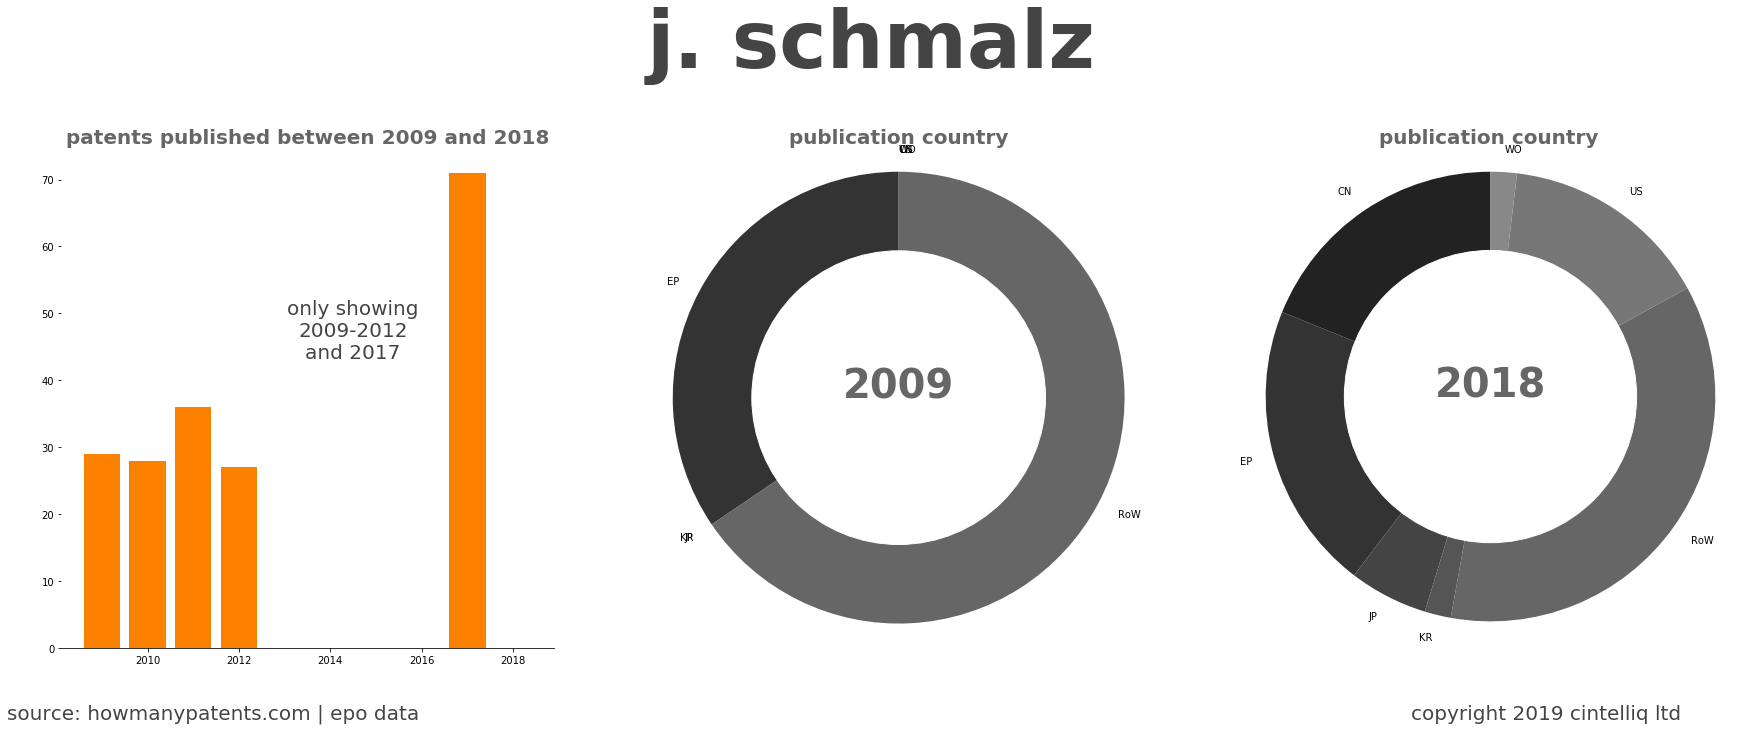 summary of patents for J. Schmalz